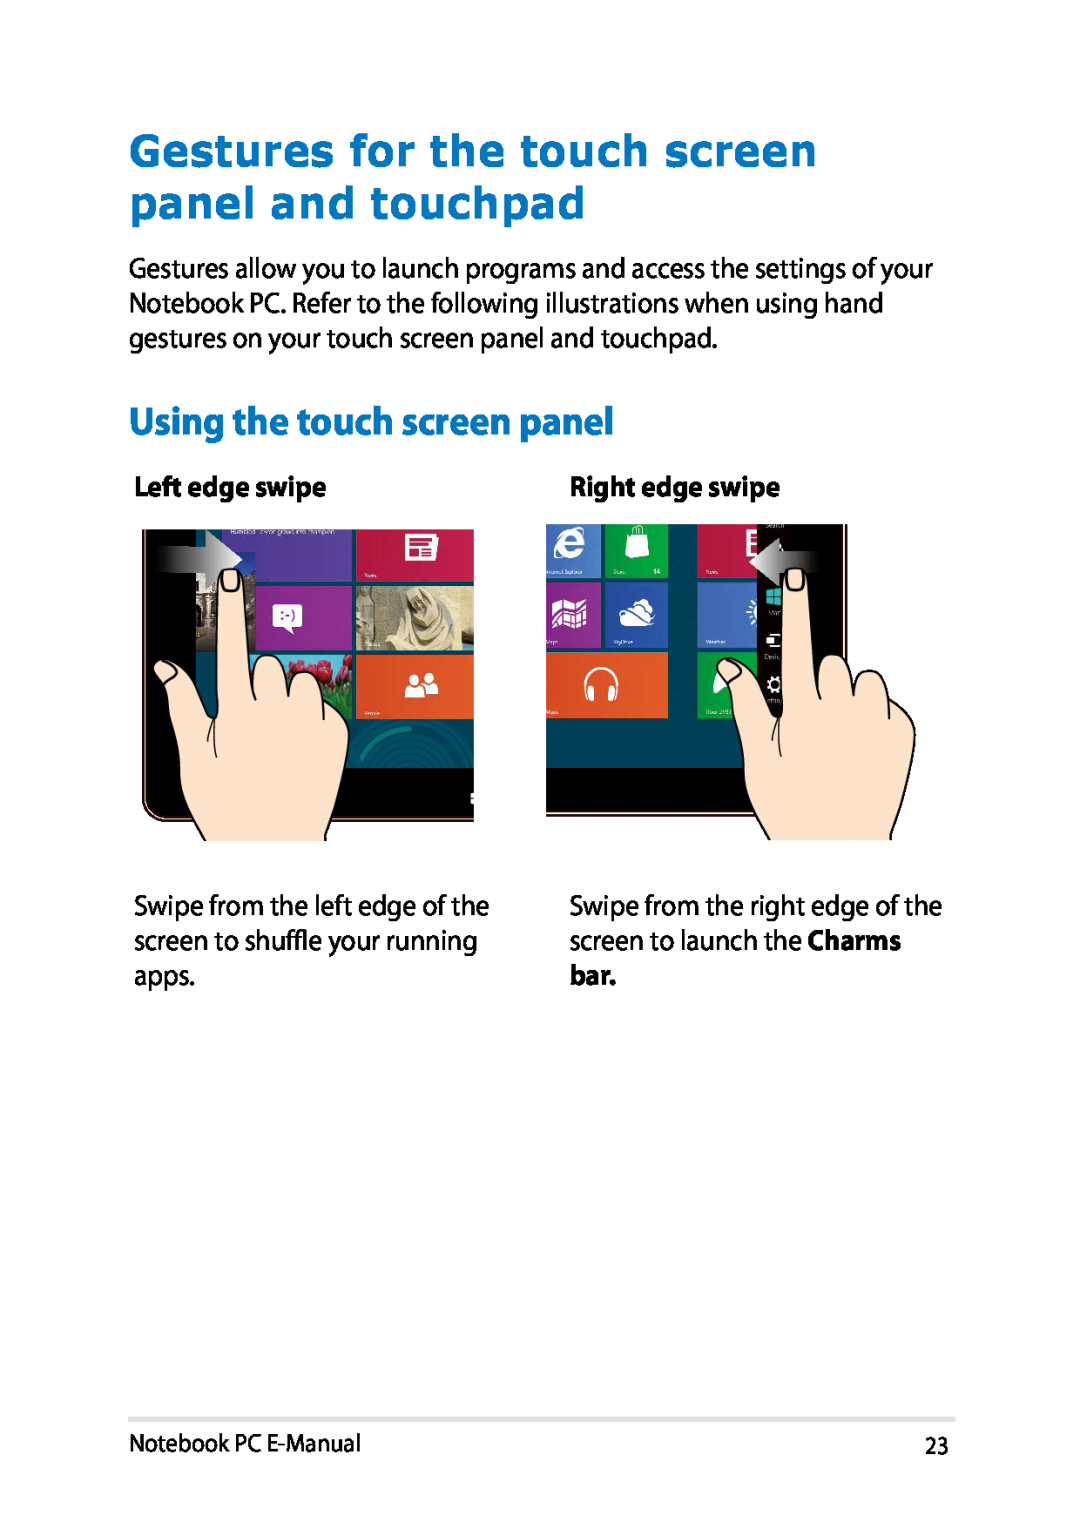 Asus E8438 manual Gestures for the touch screen panel and touchpad, Using the touch screen panel, Notebook PC E-Manual 